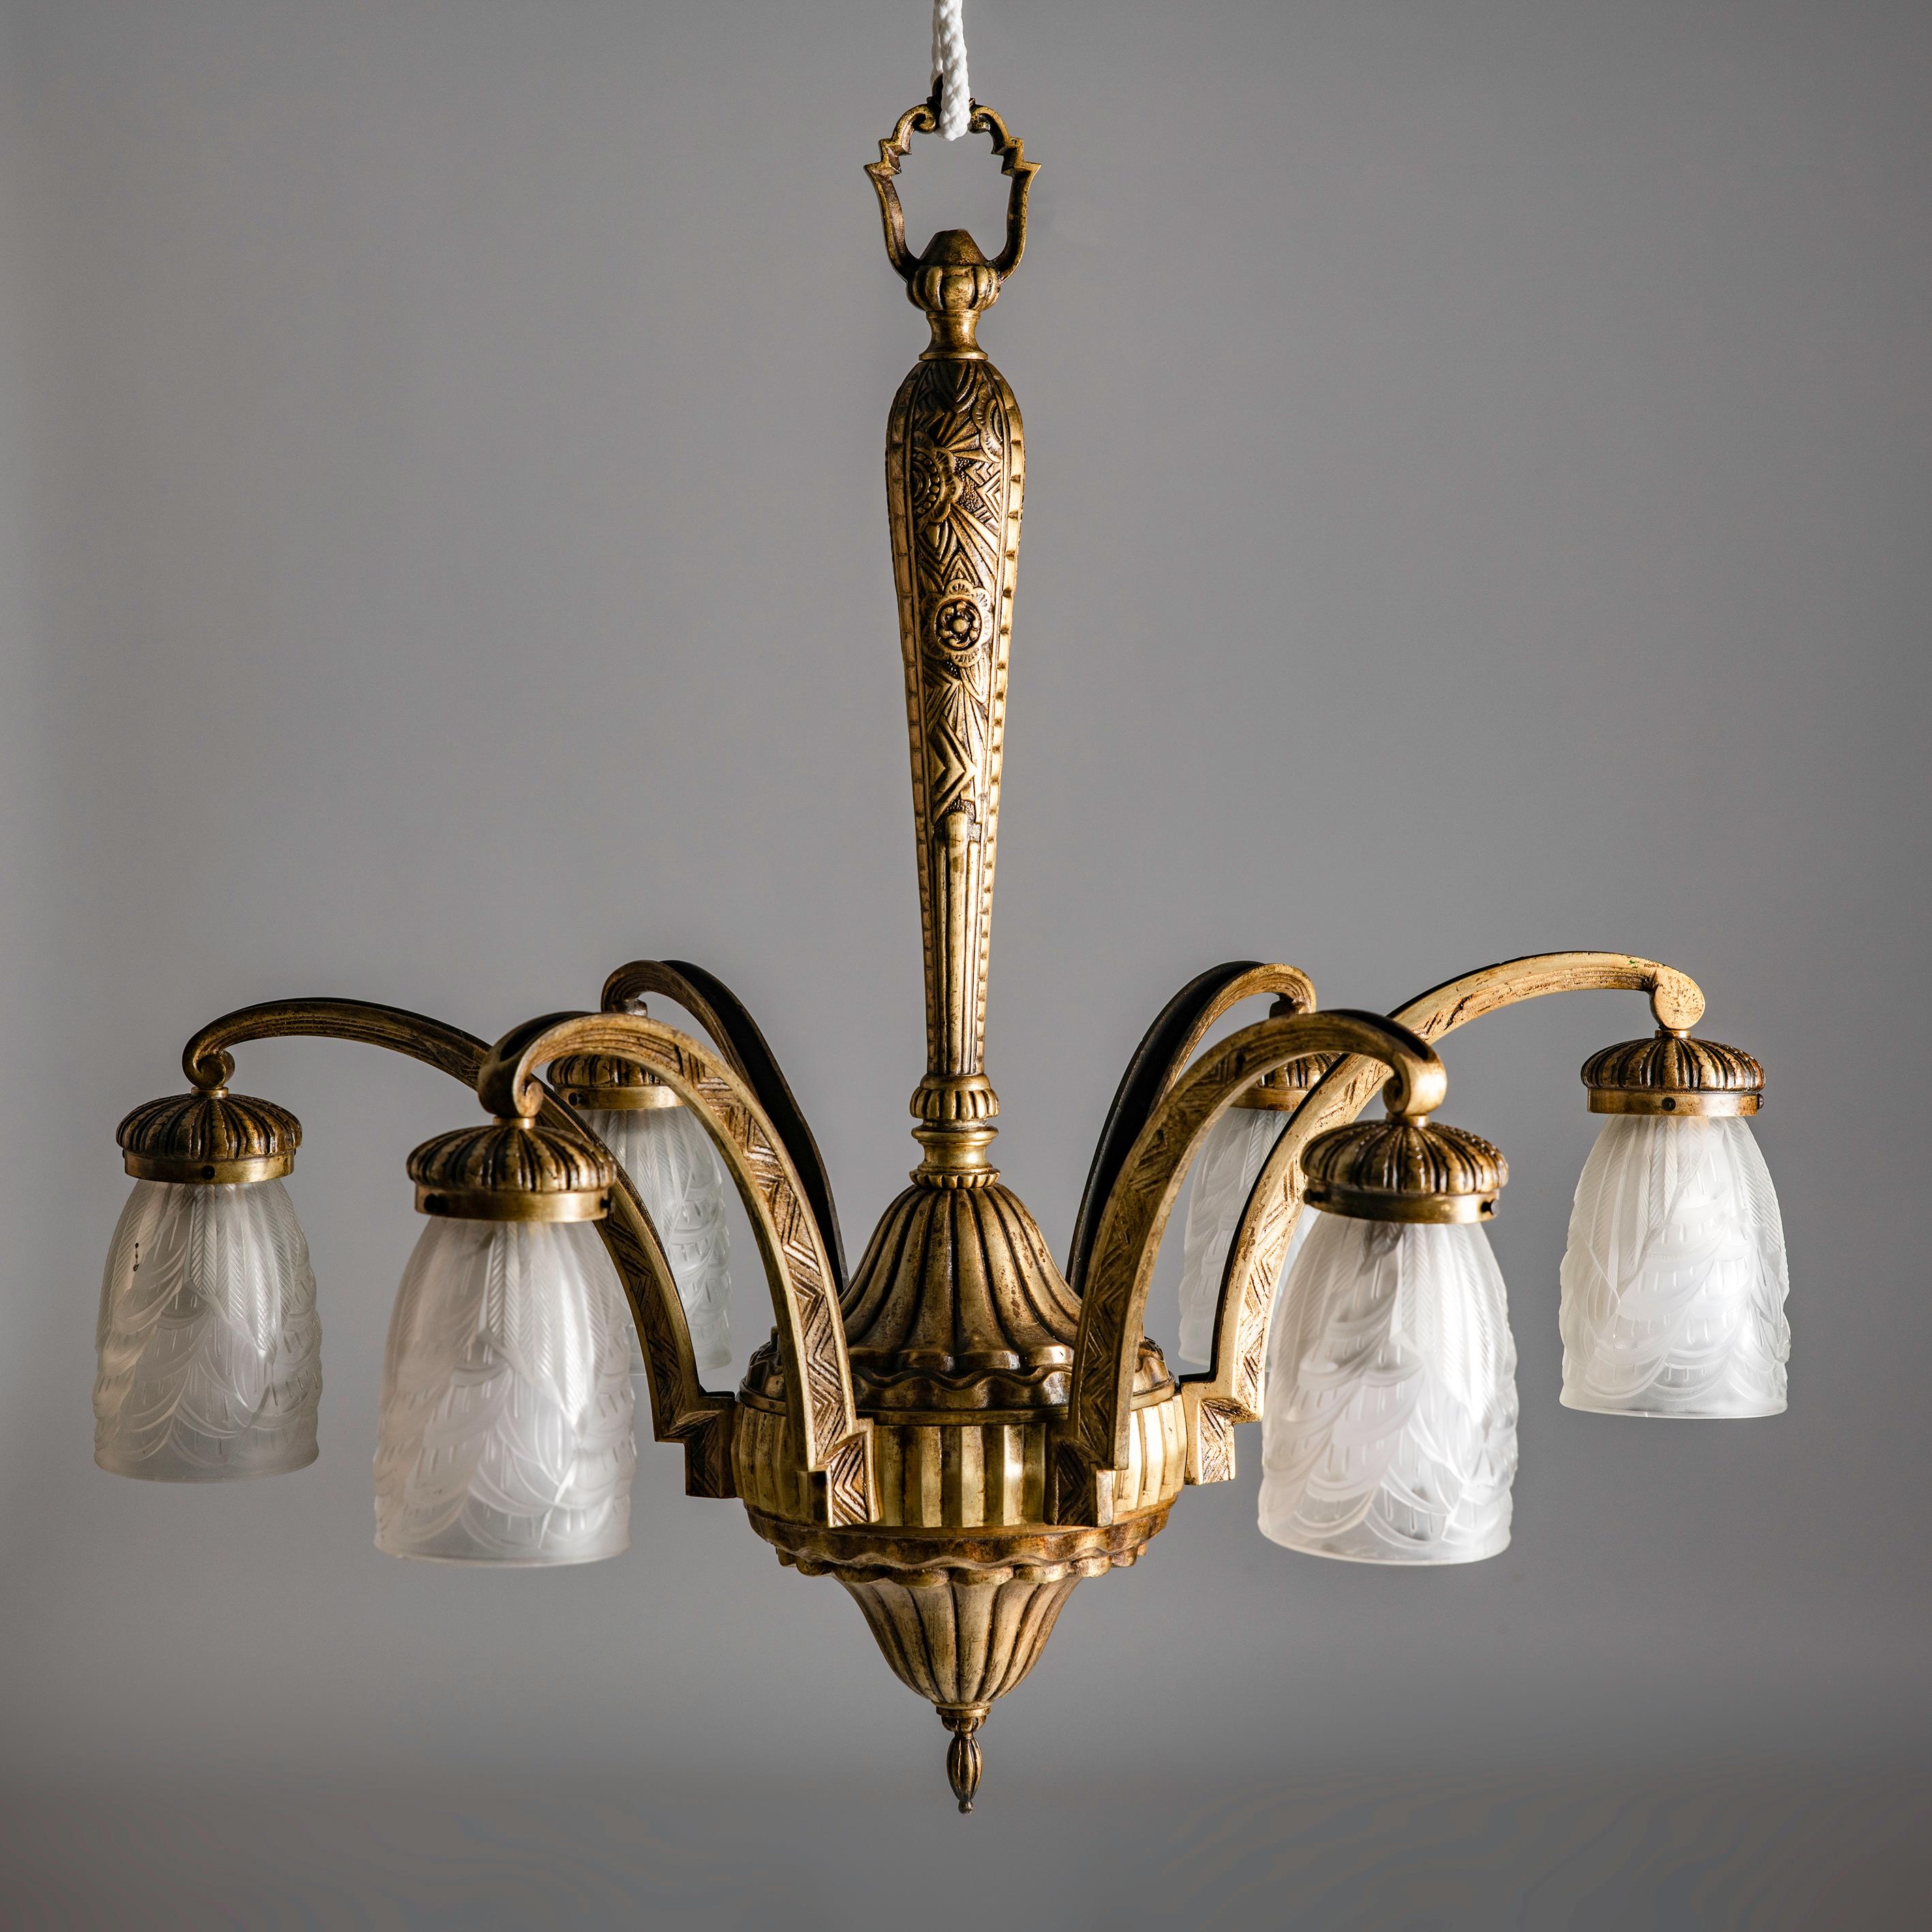 Inmerse yourself in the opulence of the Roaring Twenties with this exquisite Art Deco bronze chandelier by Hettier & Vincent, adorned with the elegance of Charles Schneider shades. A masterful fusion of geometric precision and ornate detailing, the